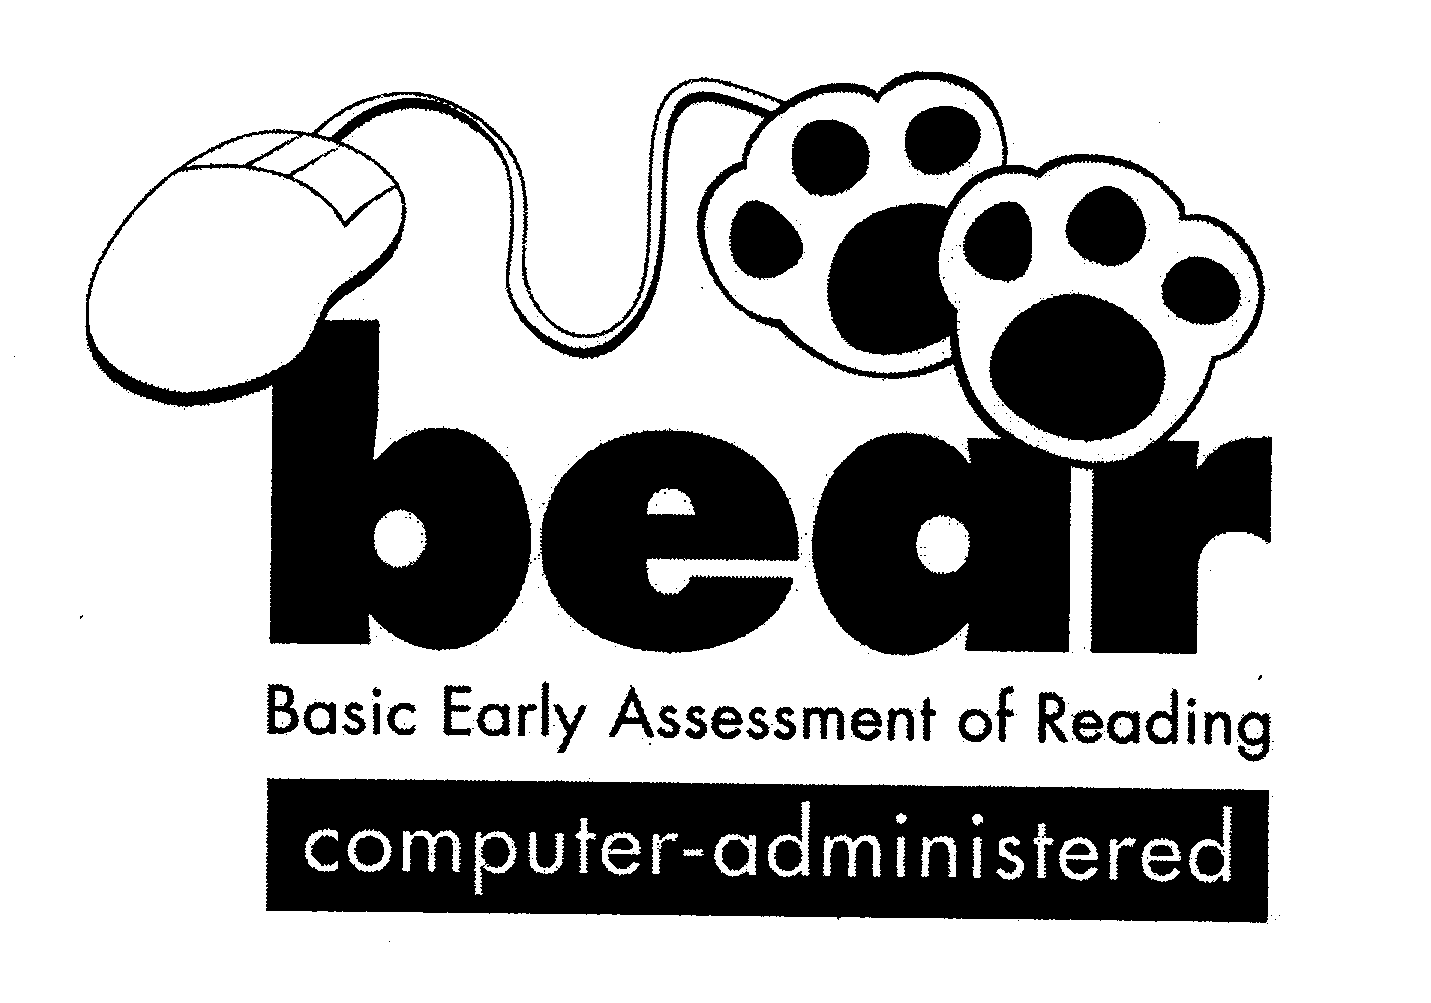  BEAR BASIC EARLY ASSESSMENT OF READING COMPUTER-ADMINISTERED